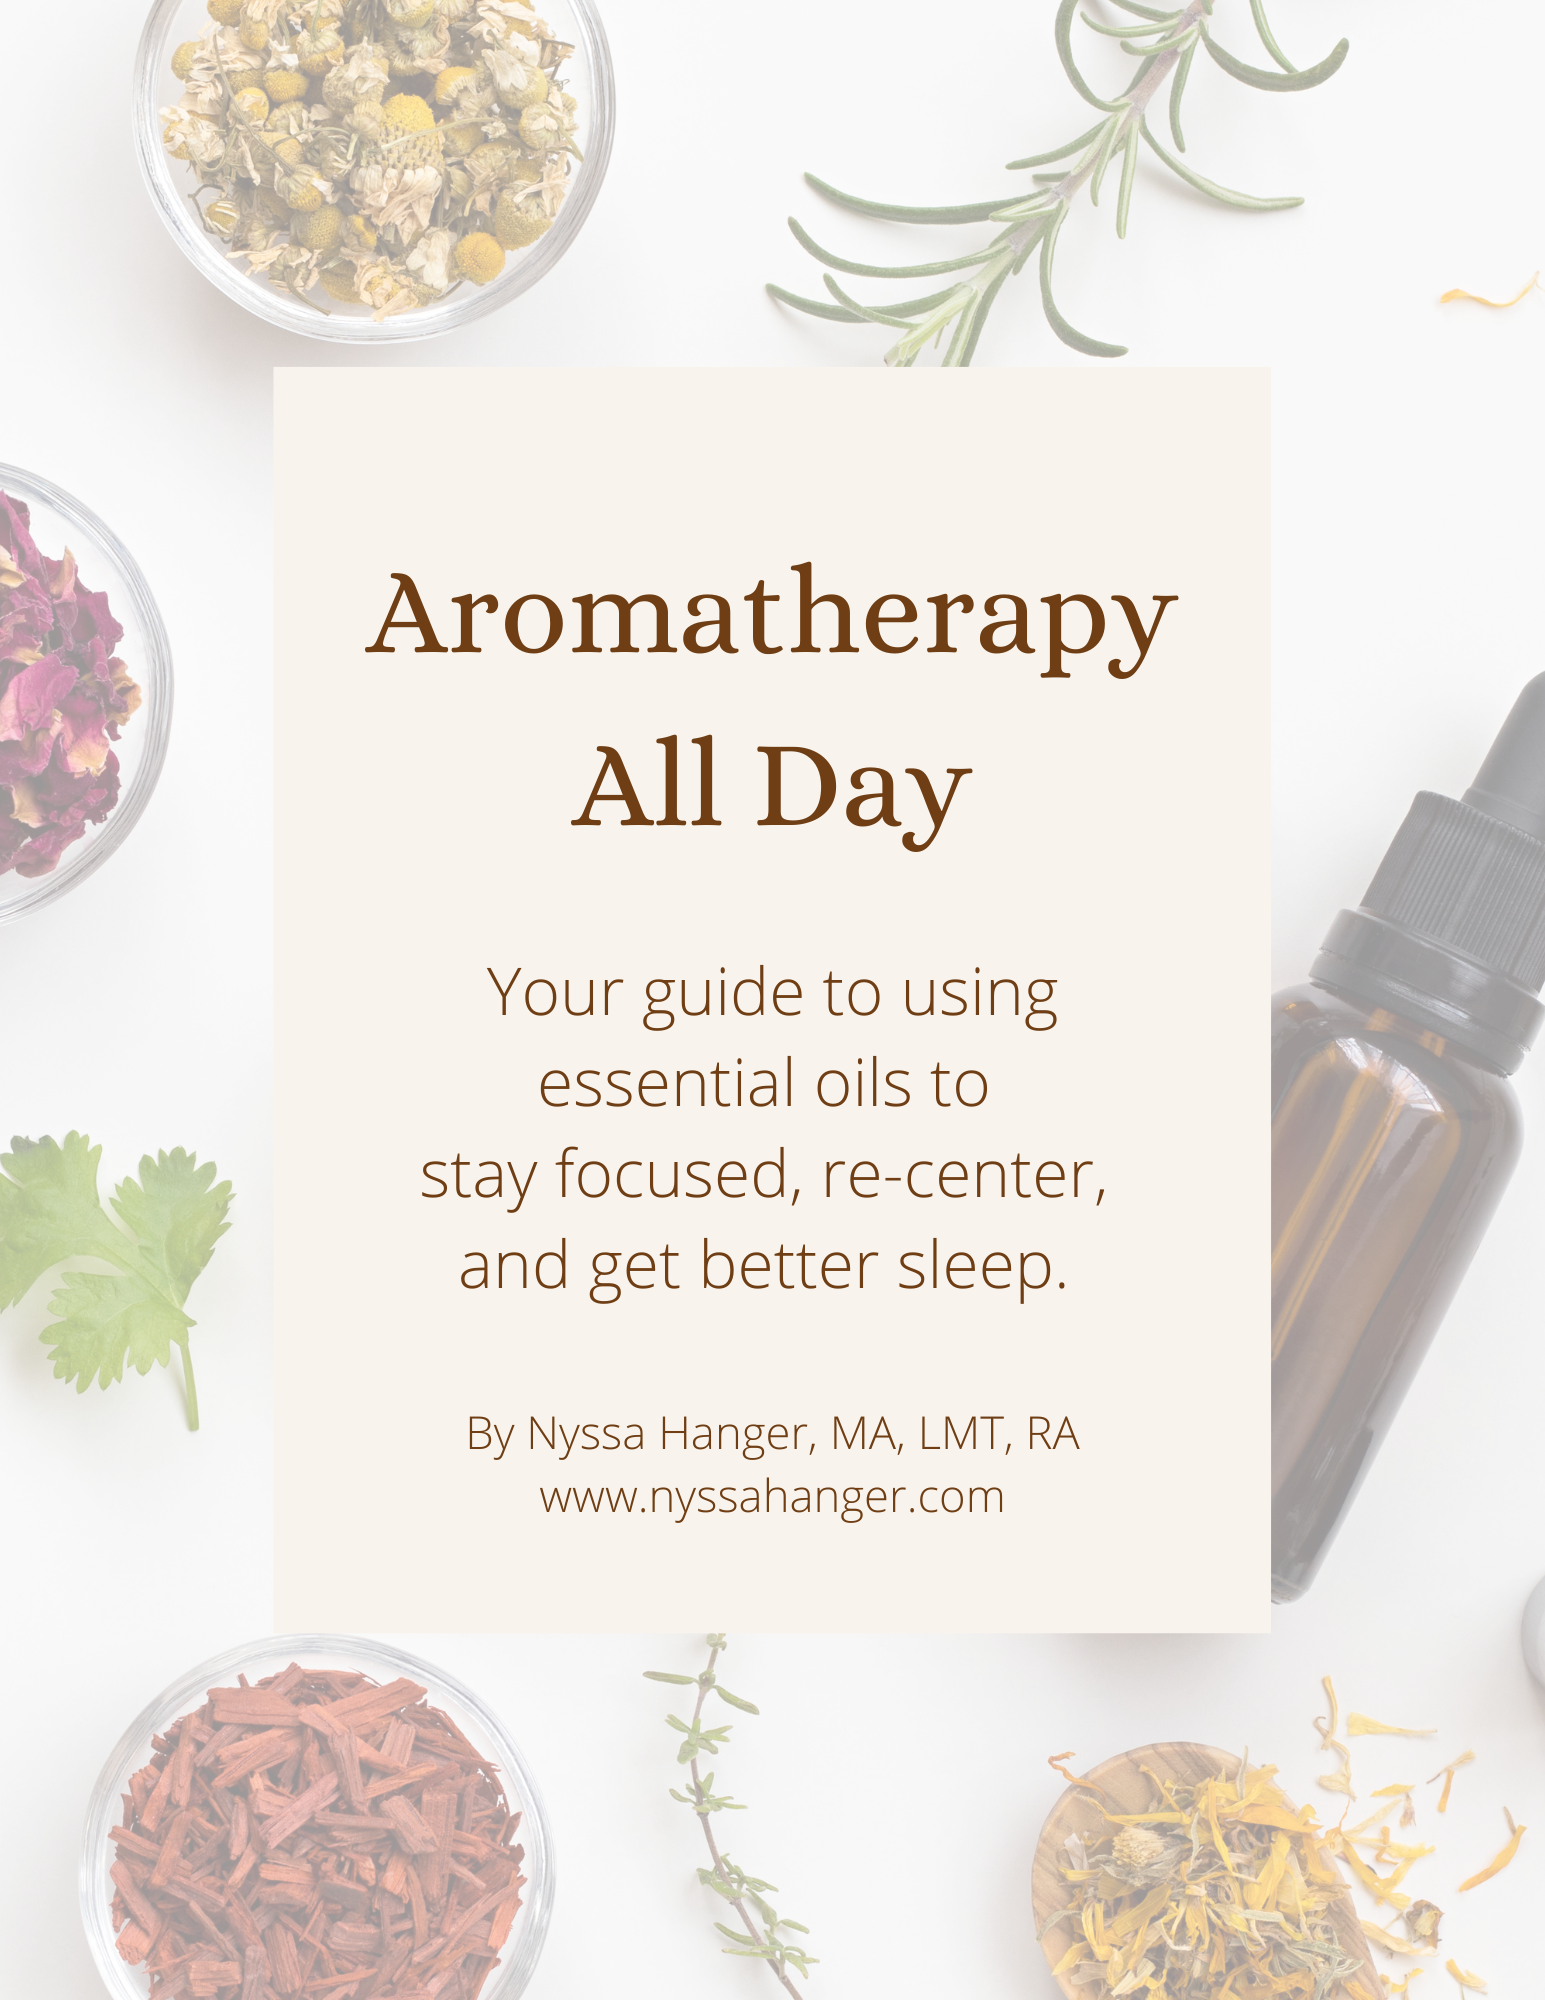 Aromatherapy All Day Image.png